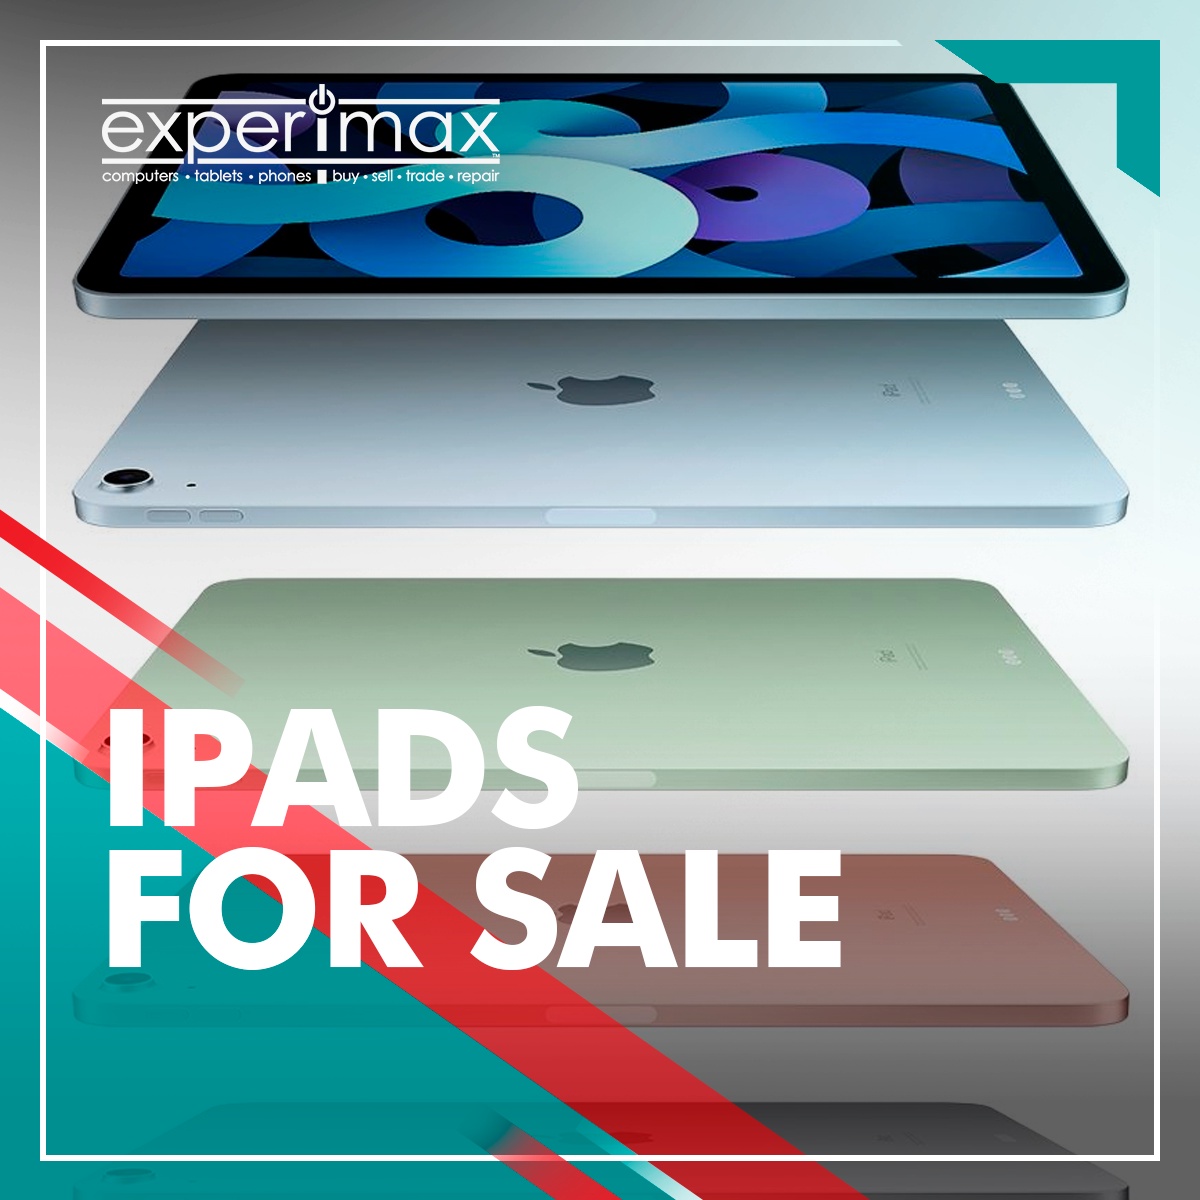 iPads for Sale: Finding the Perfect Device for Your Needs